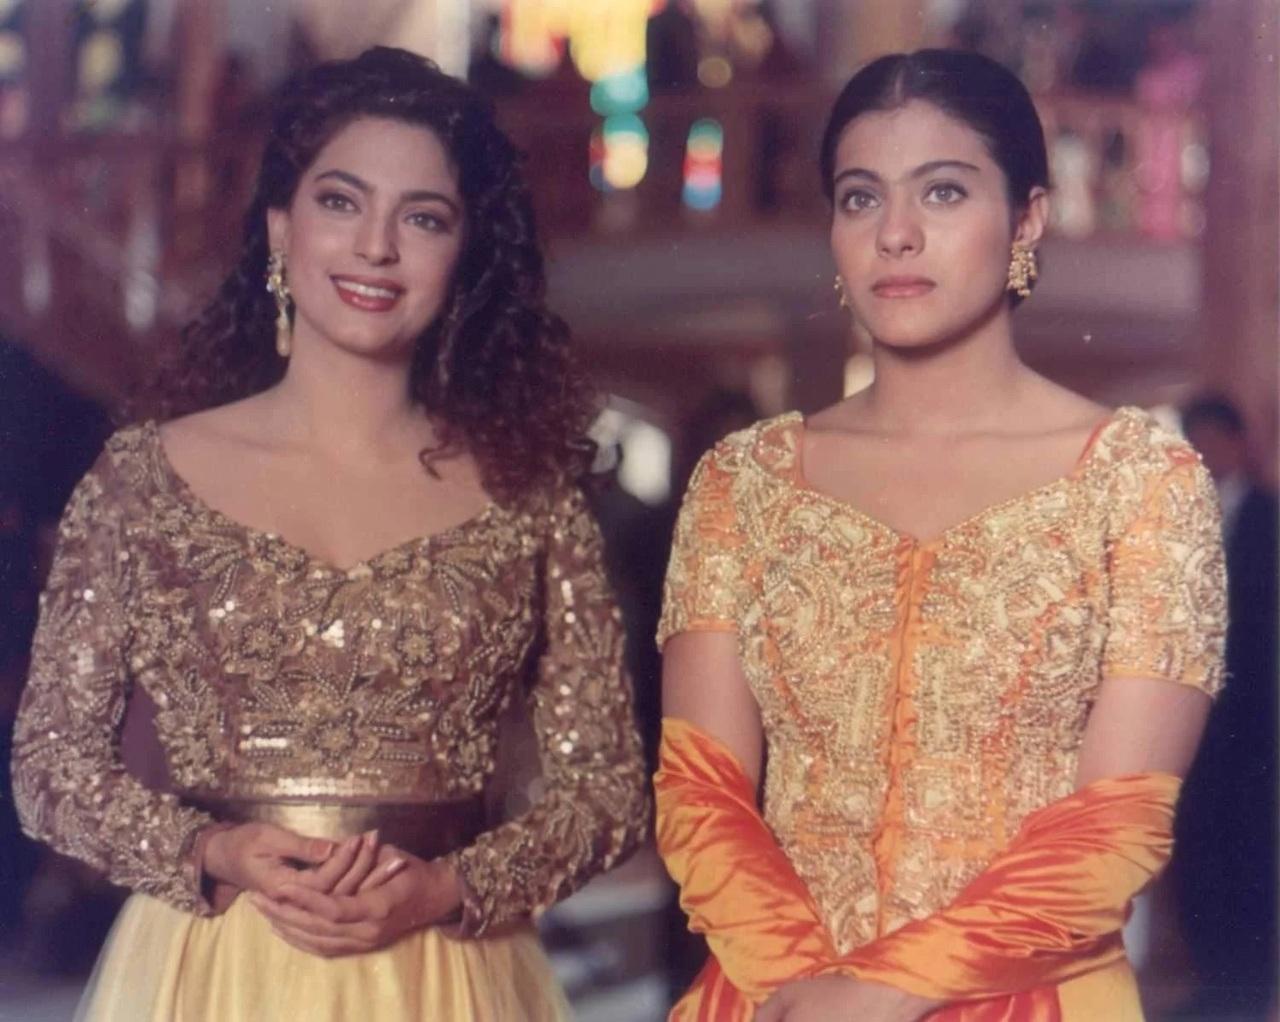 Ishq (1997) 
Not just Ajay Devgn and Aamir Khan, but the film also portrayed a beuatiful friendship between the characters played by Kajal and Juhi Chawla